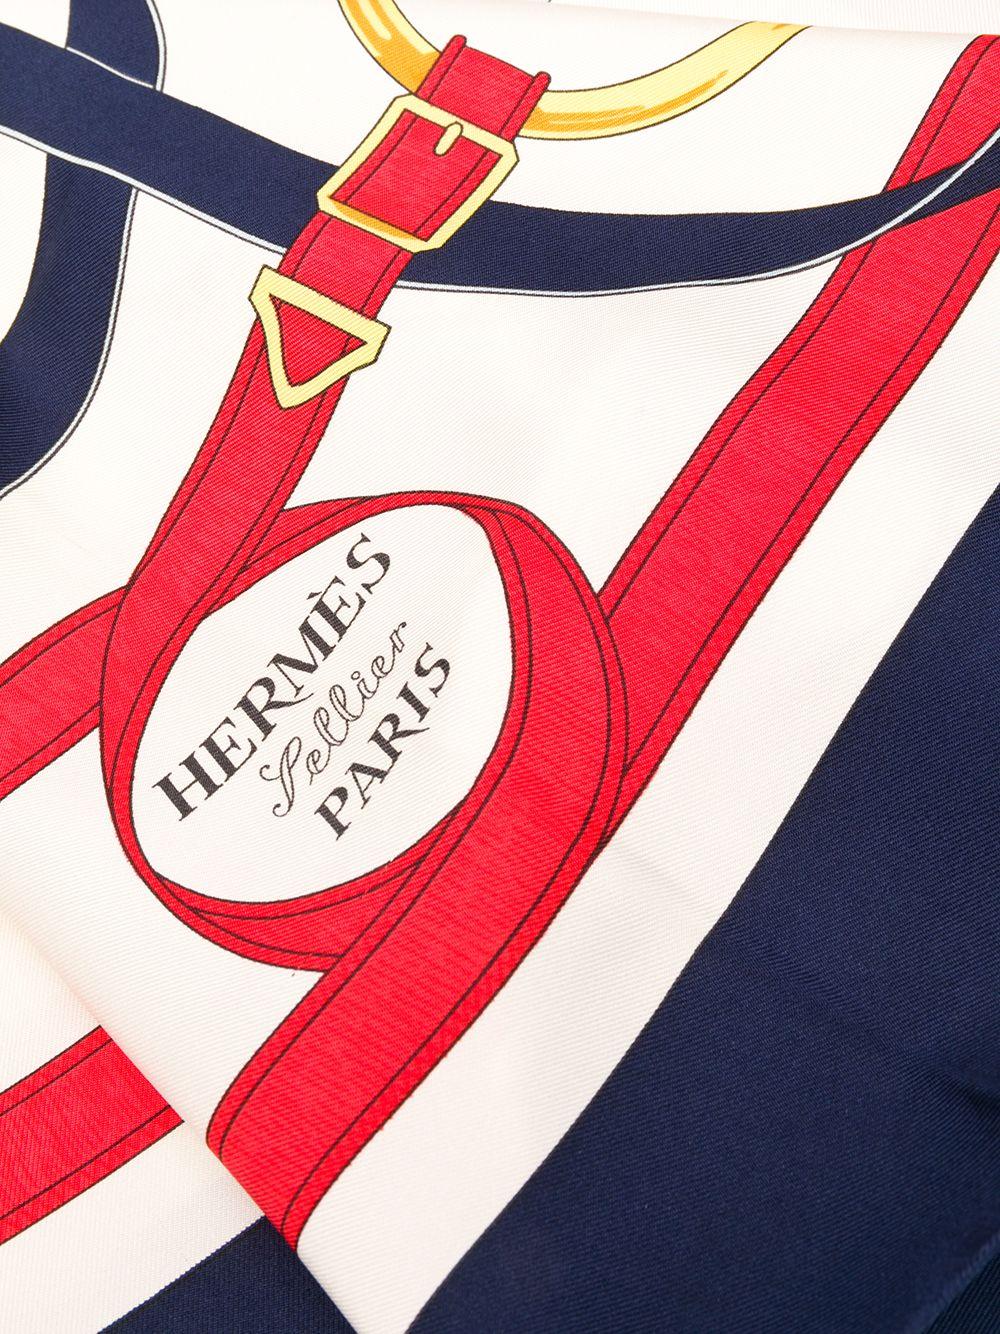 Crafted in France from the finest silk in a colourful palette of navy blue, cream, red and white, this pre-owned scarf by Hermès features a lightweight construction, a square shape and an elegant, all-over 'logo belt' motif print in alternating